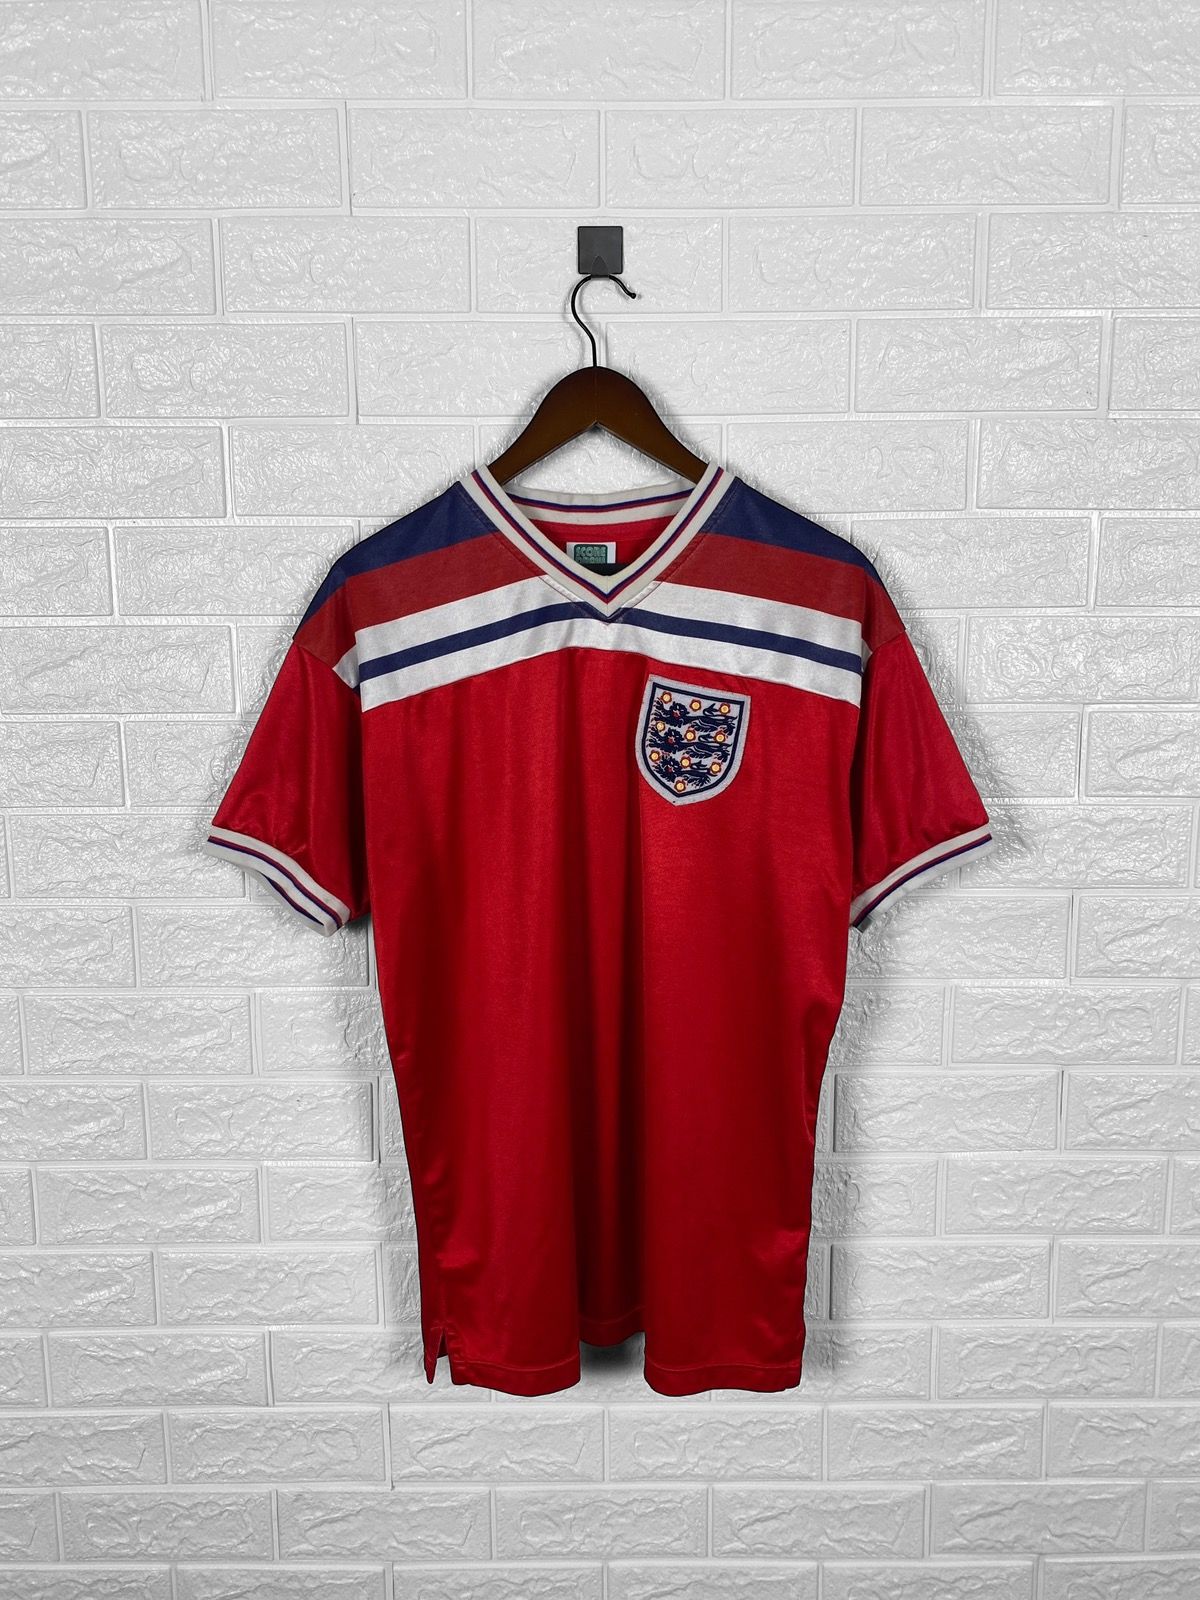 Pre-owned Jersey X Soccer Jersey Score Draw 1980 1983 England National Team Soccer Jersey In Red